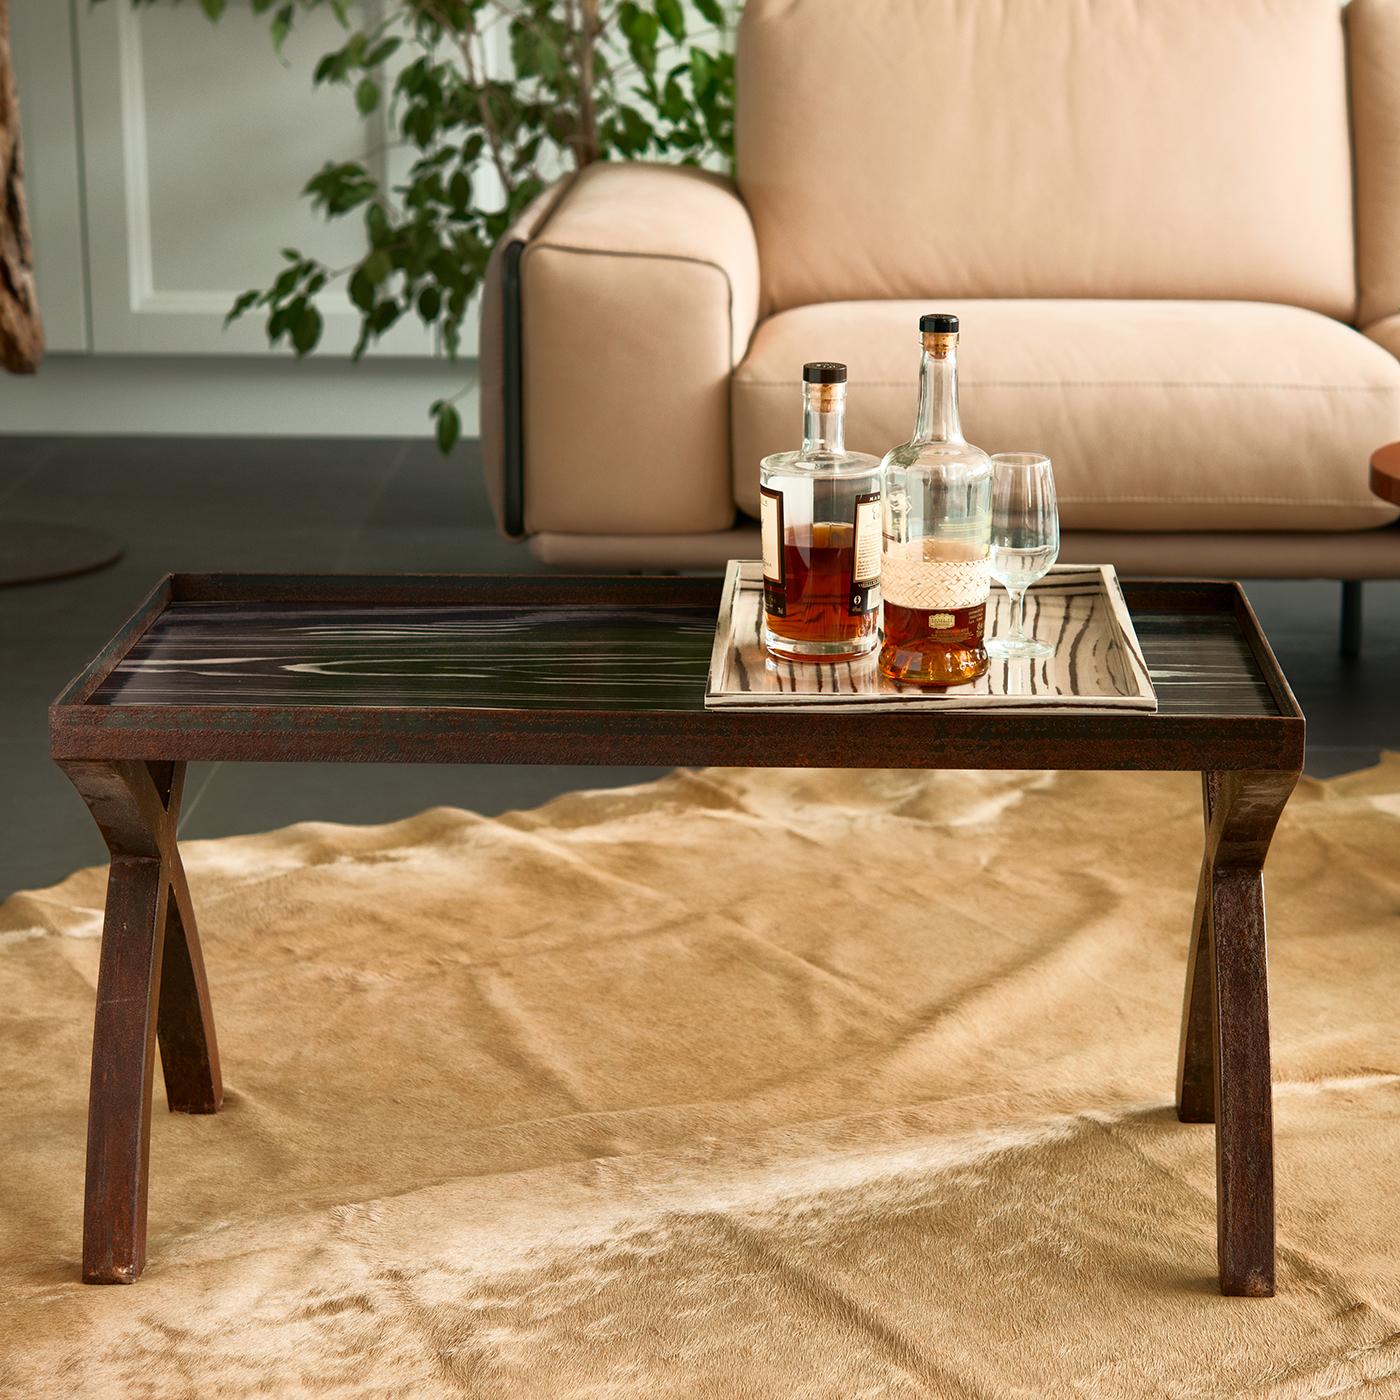 Exuding modern allure with its sleek and bold design, this coffee table is characterized by a dynamic interplay of materials and geometric shapes. The rectangular top is raised on two curved, criss-crossed legs in dark wood-veneer on each side, and